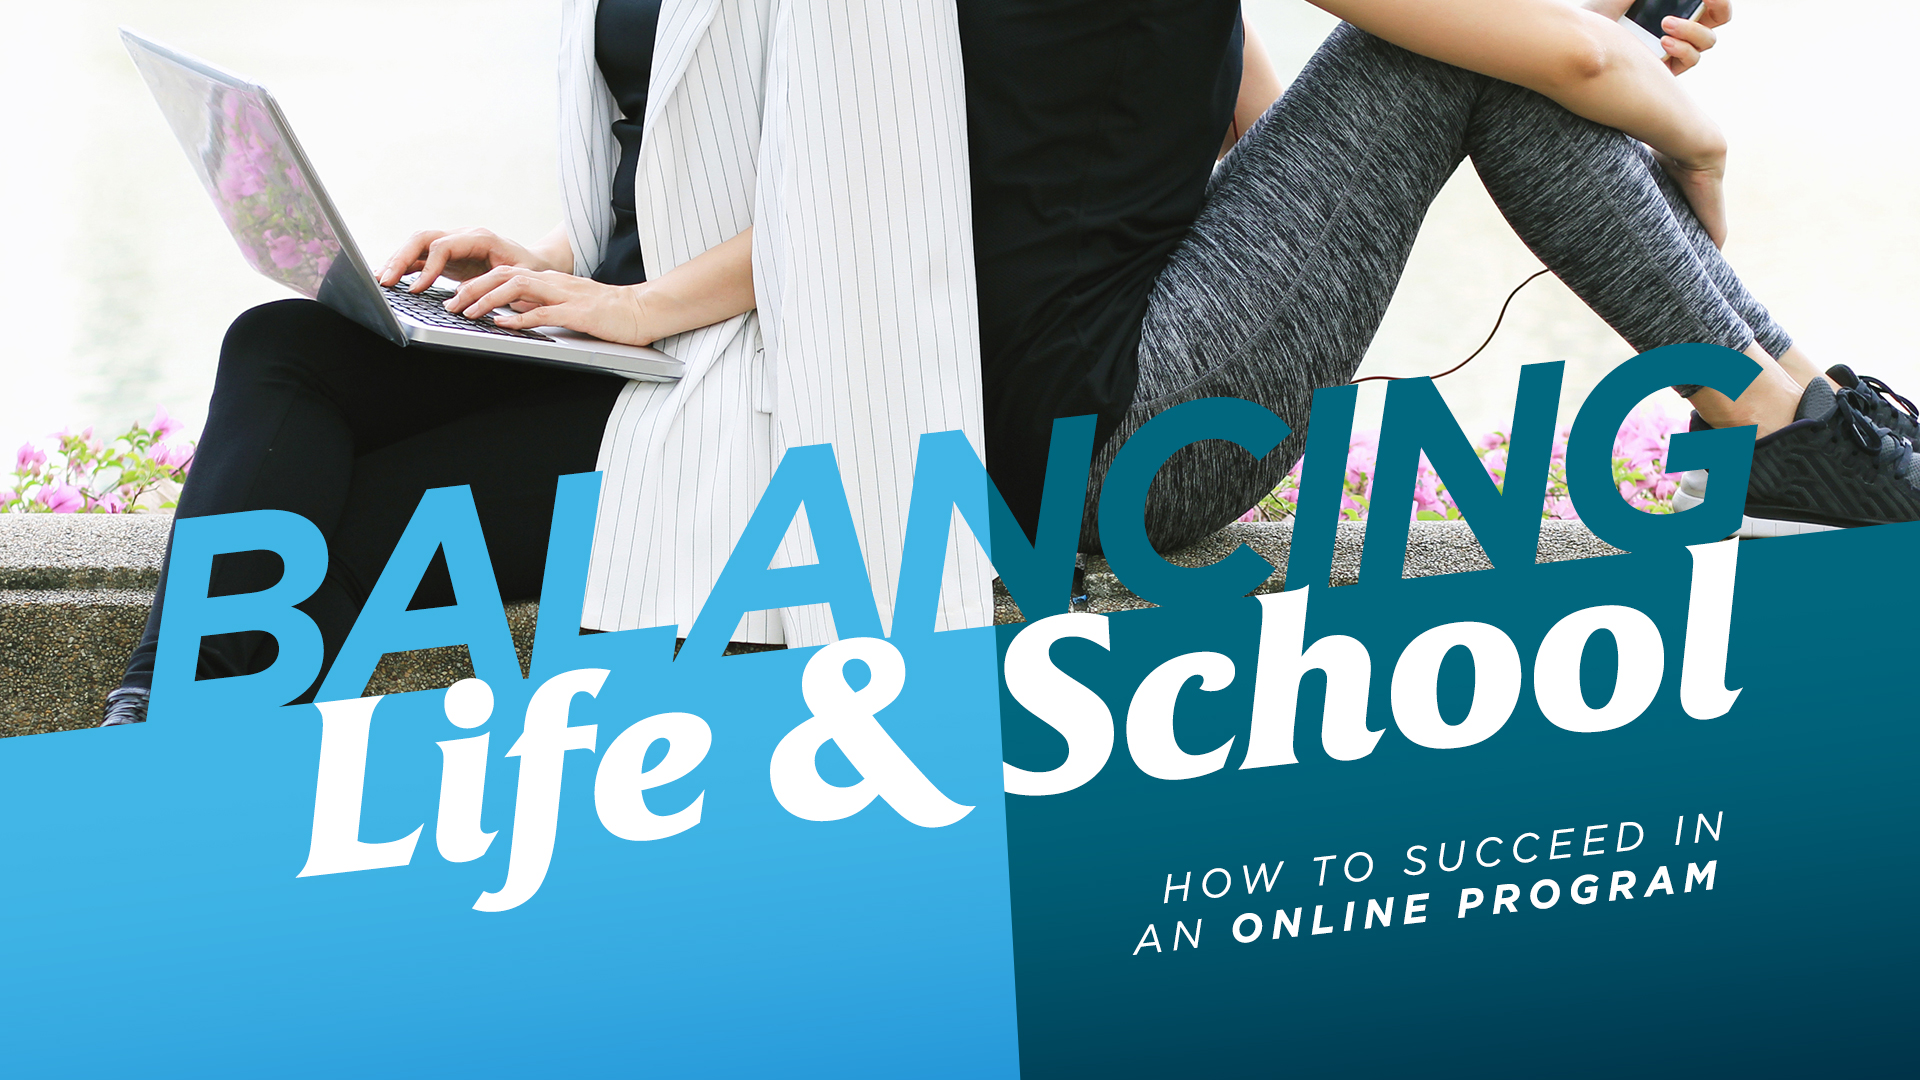 Balancing Life and School - How To Succeed In an Online Program